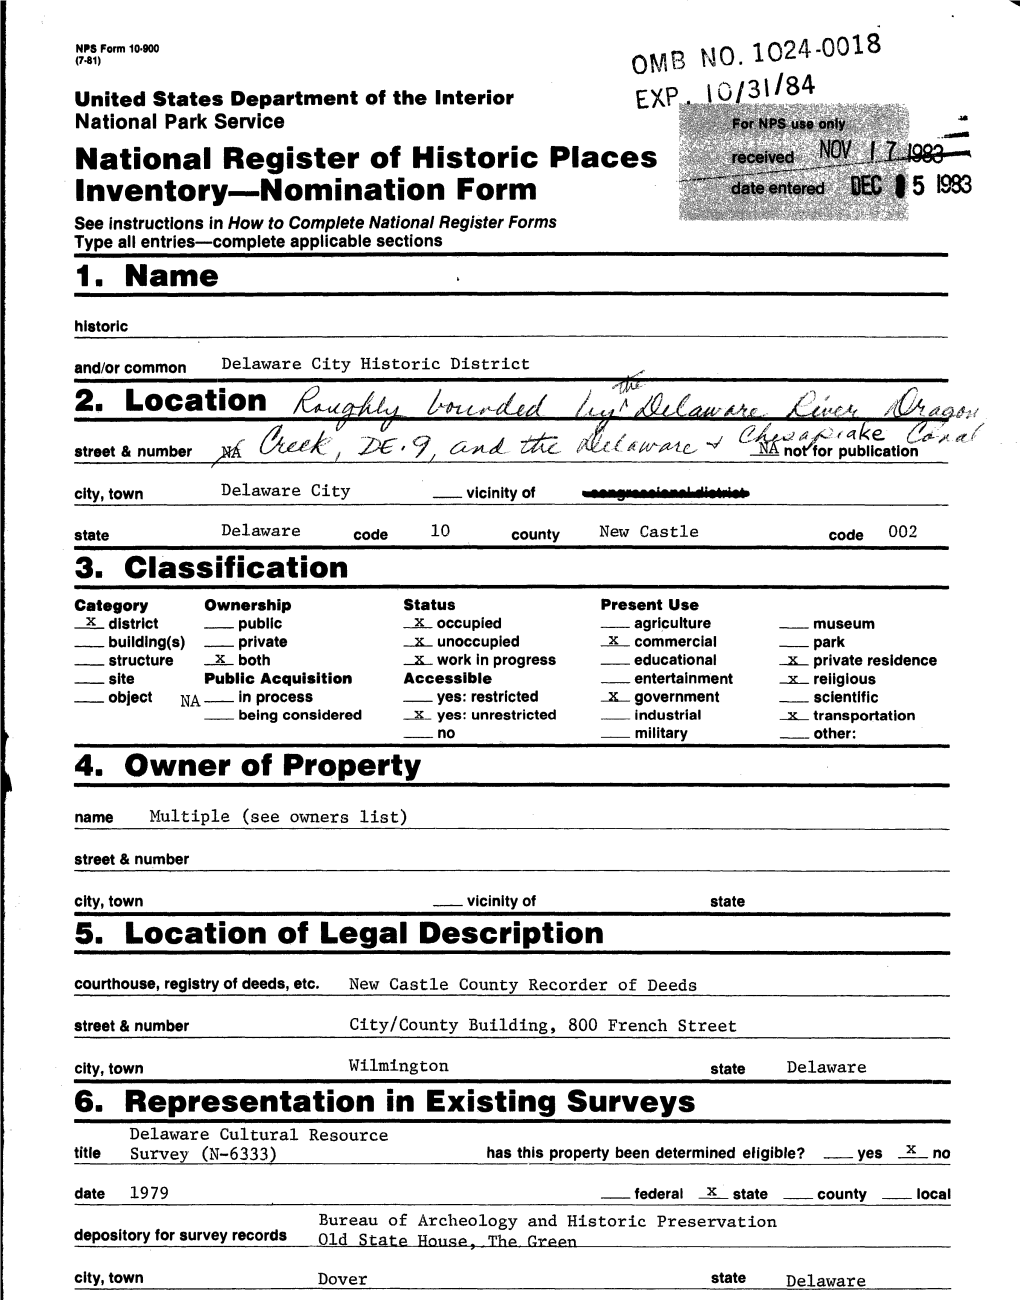 National Register of Historic Places Inventory Nomination Form 1. Name___2. Location 5. Location of Legal Descrip